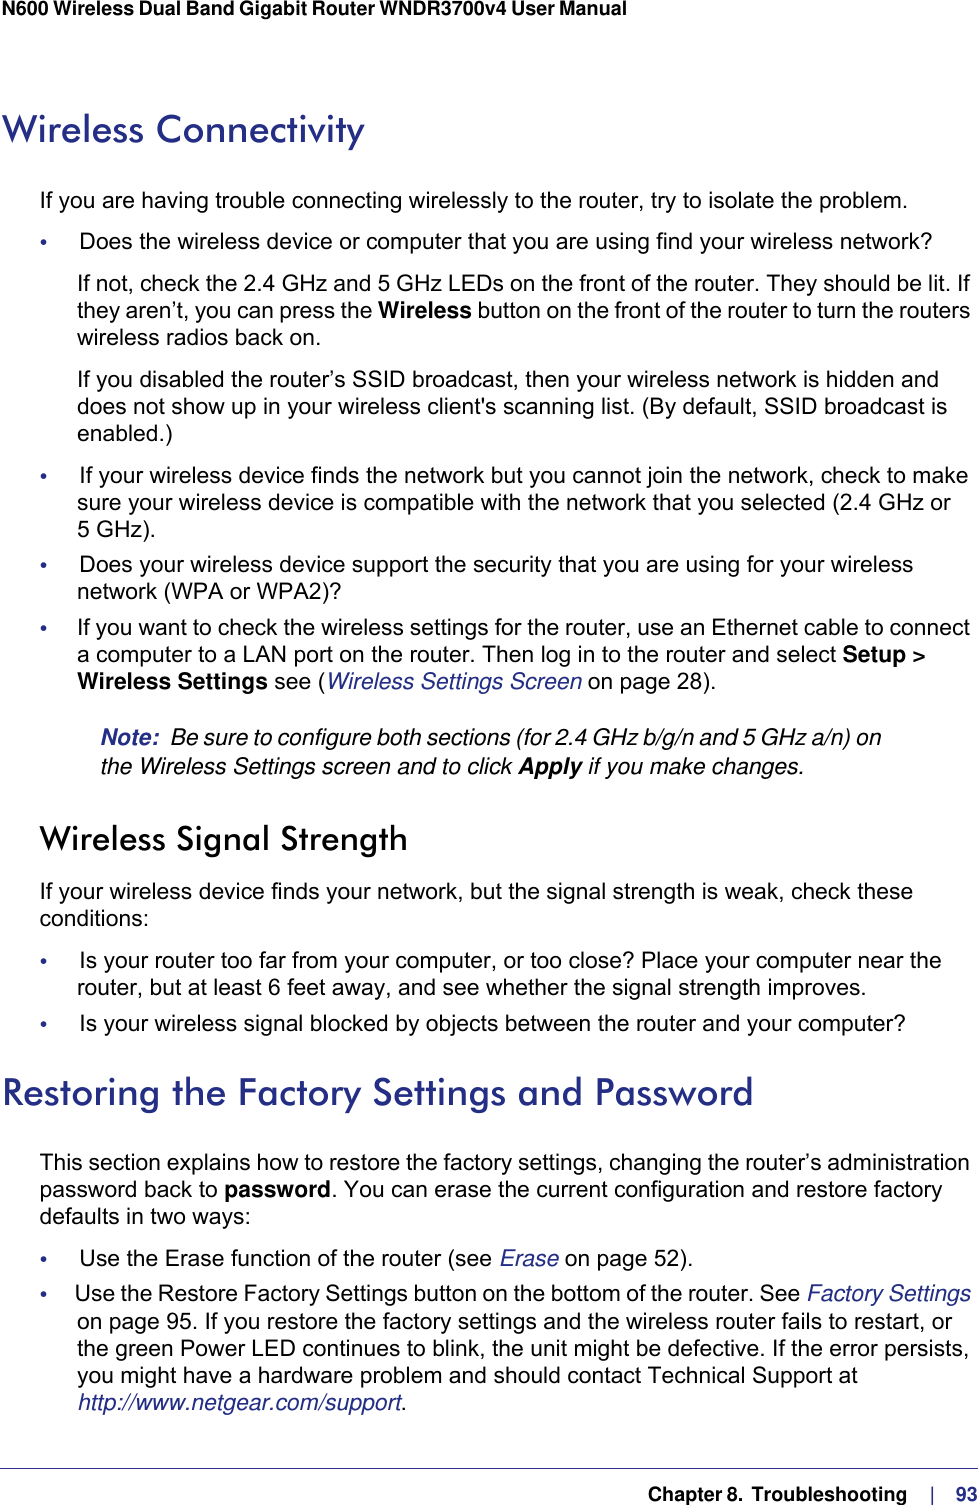   Chapter 8.  Troubleshooting     |    93N600 Wireless Dual Band Gigabit Router WNDR3700v4 User Manual Wireless ConnectivityIf you are having trouble connecting wirelessly to the router, try to isolate the problem. •     Does the wireless device or computer that you are using find your wireless network?If not, check the 2.4 GHz and 5 GHz LEDs on the front of the router. They should be lit. If they aren’t, you can press the Wireless button on the front of the router to turn the routers wireless radios back on.If you disabled the router’s SSID broadcast, then your wireless network is hidden and does not show up in your wireless client&apos;s scanning list. (By default, SSID broadcast is enabled.)•     If your wireless device finds the network but you cannot join the network, check to make sure your wireless device is compatible with the network that you selected (2.4 GHz or 5  GHz). •     Does your wireless device support the security that you are using for your wireless network (WPA or WPA2)?•     If you want to check the wireless settings for the router, use an Ethernet cable to connect a computer to a LAN port on the router. Then log in to the router and select Setup &gt; Wireless Settings see (Wireless Settings Screen on page  28). Note:  Be sure to configure both sections (for 2.4 GHz b/g/n and 5 GHz a/n) on the Wireless Settings screen and to click Apply if you make changes.Wireless Signal StrengthIf your wireless device finds your network, but the signal strength is weak, check these conditions:•     Is your router too far from your computer, or too close? Place your computer near the router, but at least 6 feet away, and see whether the signal strength improves.•     Is your wireless signal blocked by objects between the router and your computer?Restoring the Factory Settings and PasswordThis section explains how to restore the factory settings, changing the router’s administration password back to password. You can erase the current configuration and restore factory defaults in two ways:•     Use the Erase function of the router (see Erase on page  52).•     Use the Restore Factory Settings button on the bottom of the router. See Factory Settings on page  95. If you restore the factory settings and the wireless router fails to restart, or the green Power LED continues to blink, the unit might be defective. If the error persists, you might have a hardware problem and should contact Technical Support at http://www.netgear.com/support.